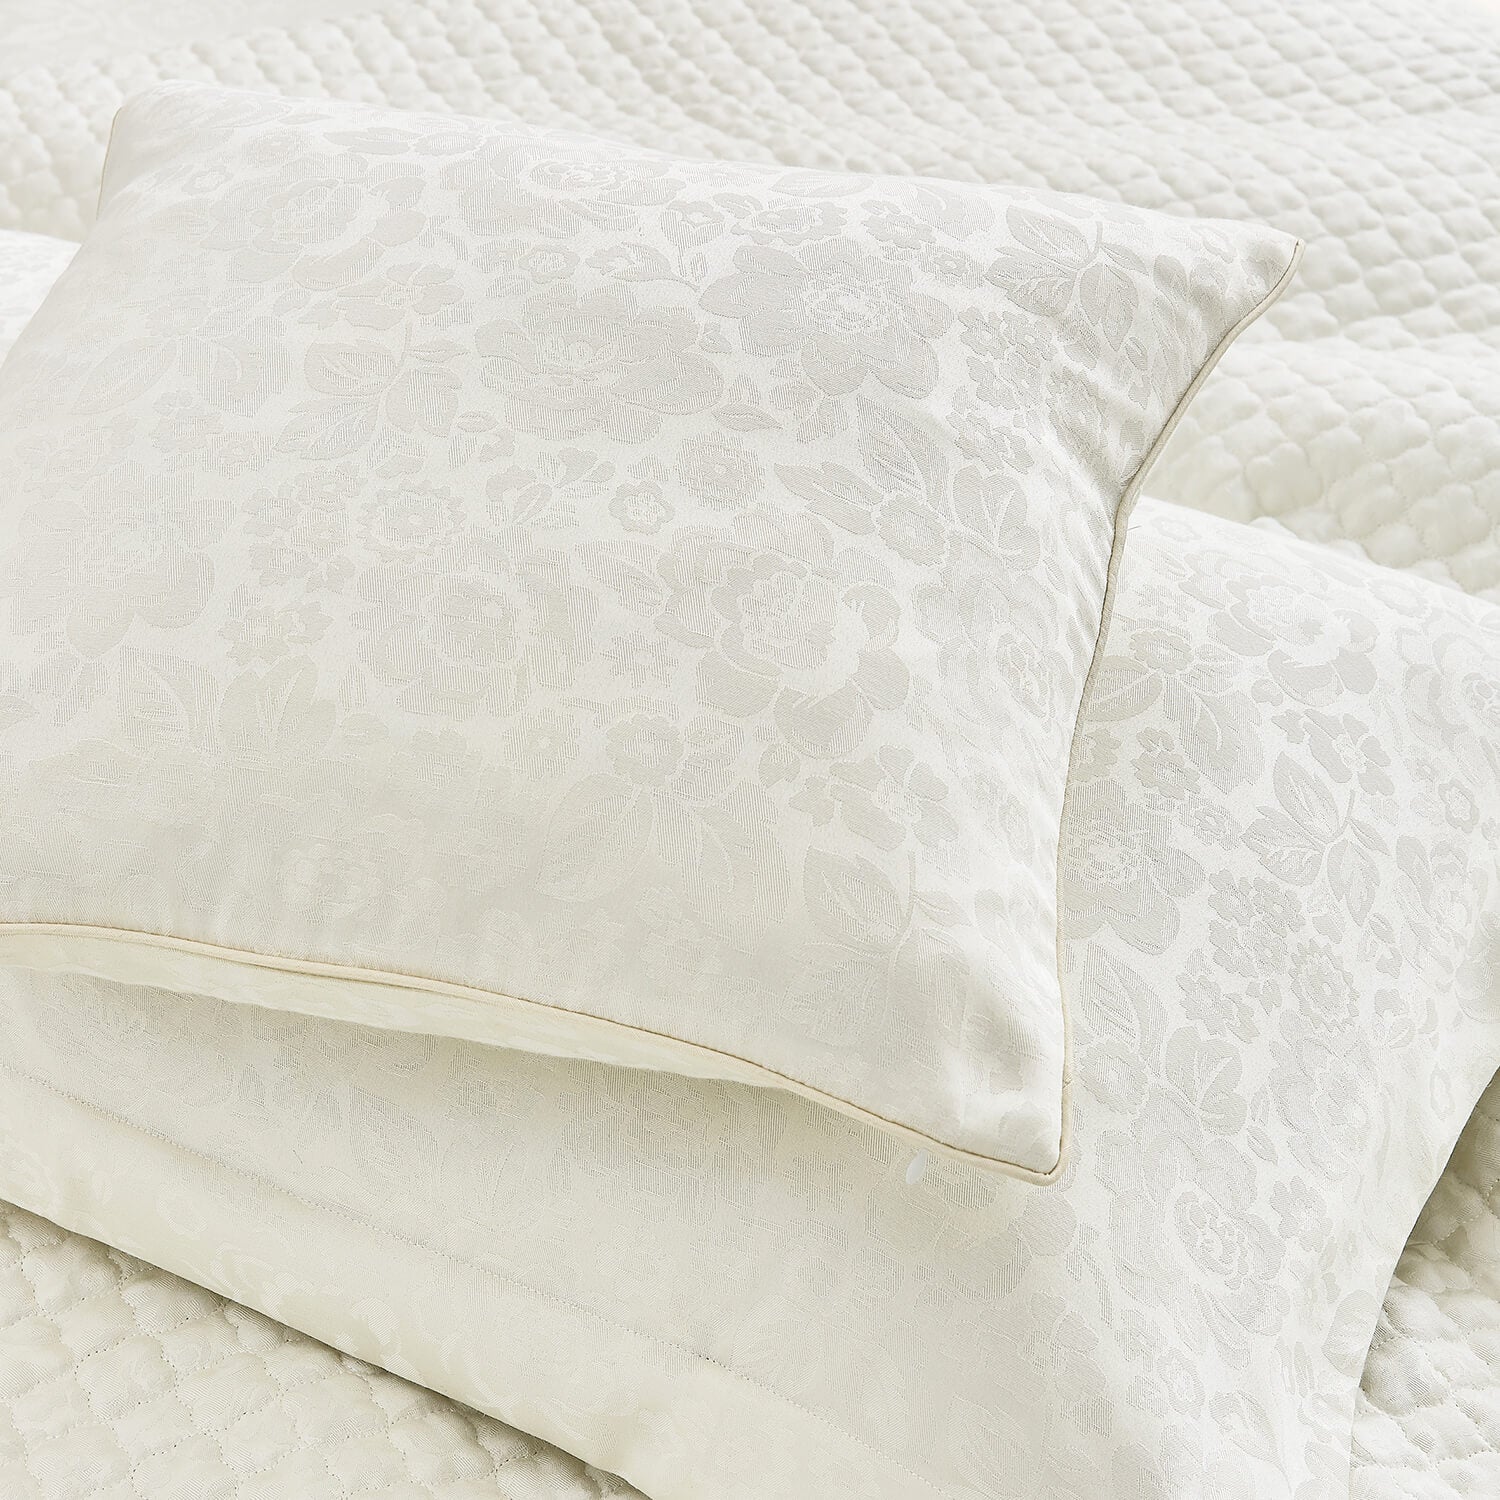  Helena Springfield Cassie Duvet Cover - Ivory 2 Shaws Department Stores